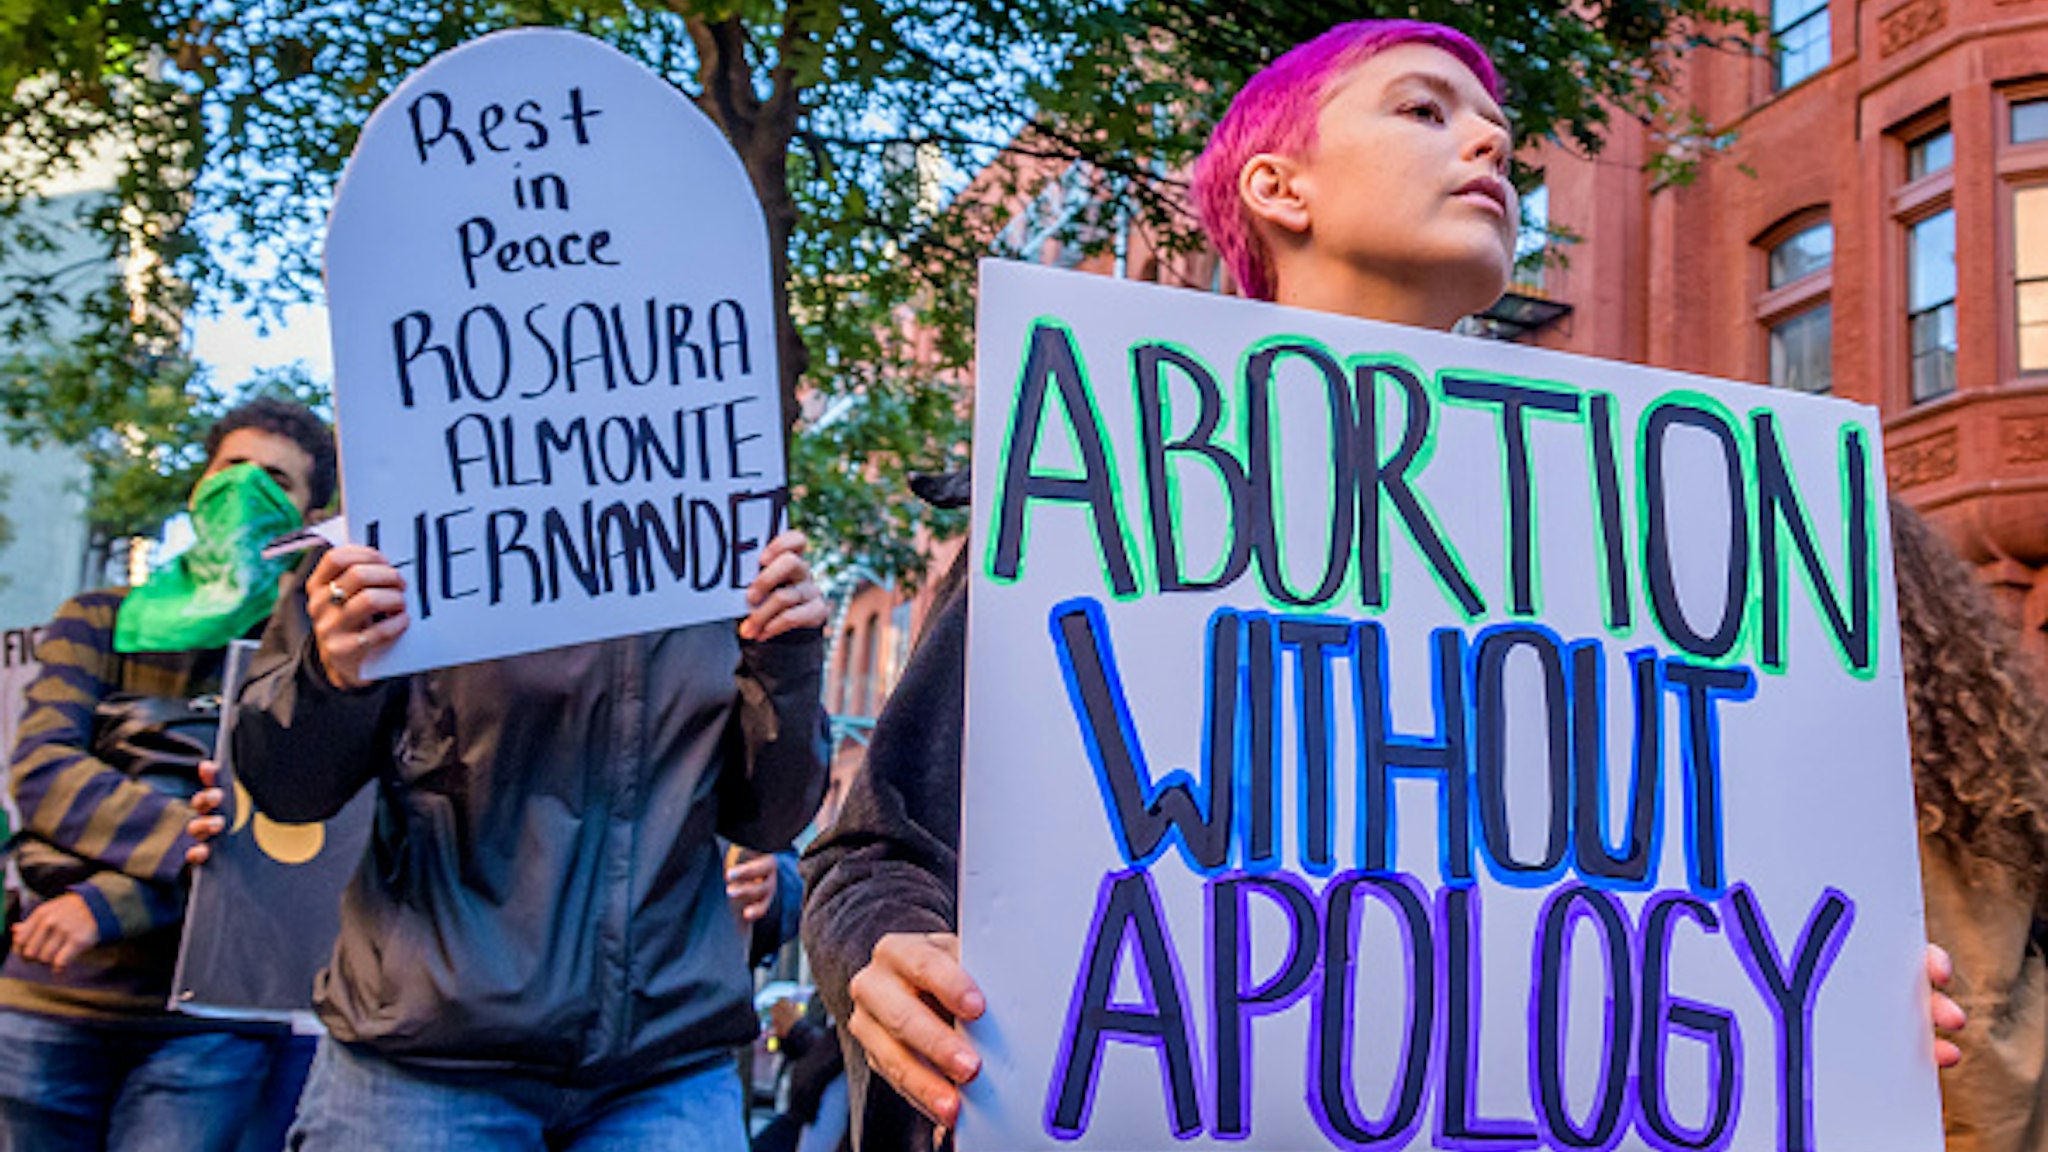 MANHATTAN, NEW YORK, UNITED STATES - 2019/10/05: Pro choice protesters picketed outside the church where anti-abortion groups gathered. Abortion Rights activists from a number of organizations held a demonstration outside of the Basilica of St. Patrick's Old Cathedral in SoHo, where congregants meet on the first Saturday of every month before marching to the Planned Parenthood clinic on Bleecker Street to pray, and to allegedly harass and intimidate patients as they enter the clinic.